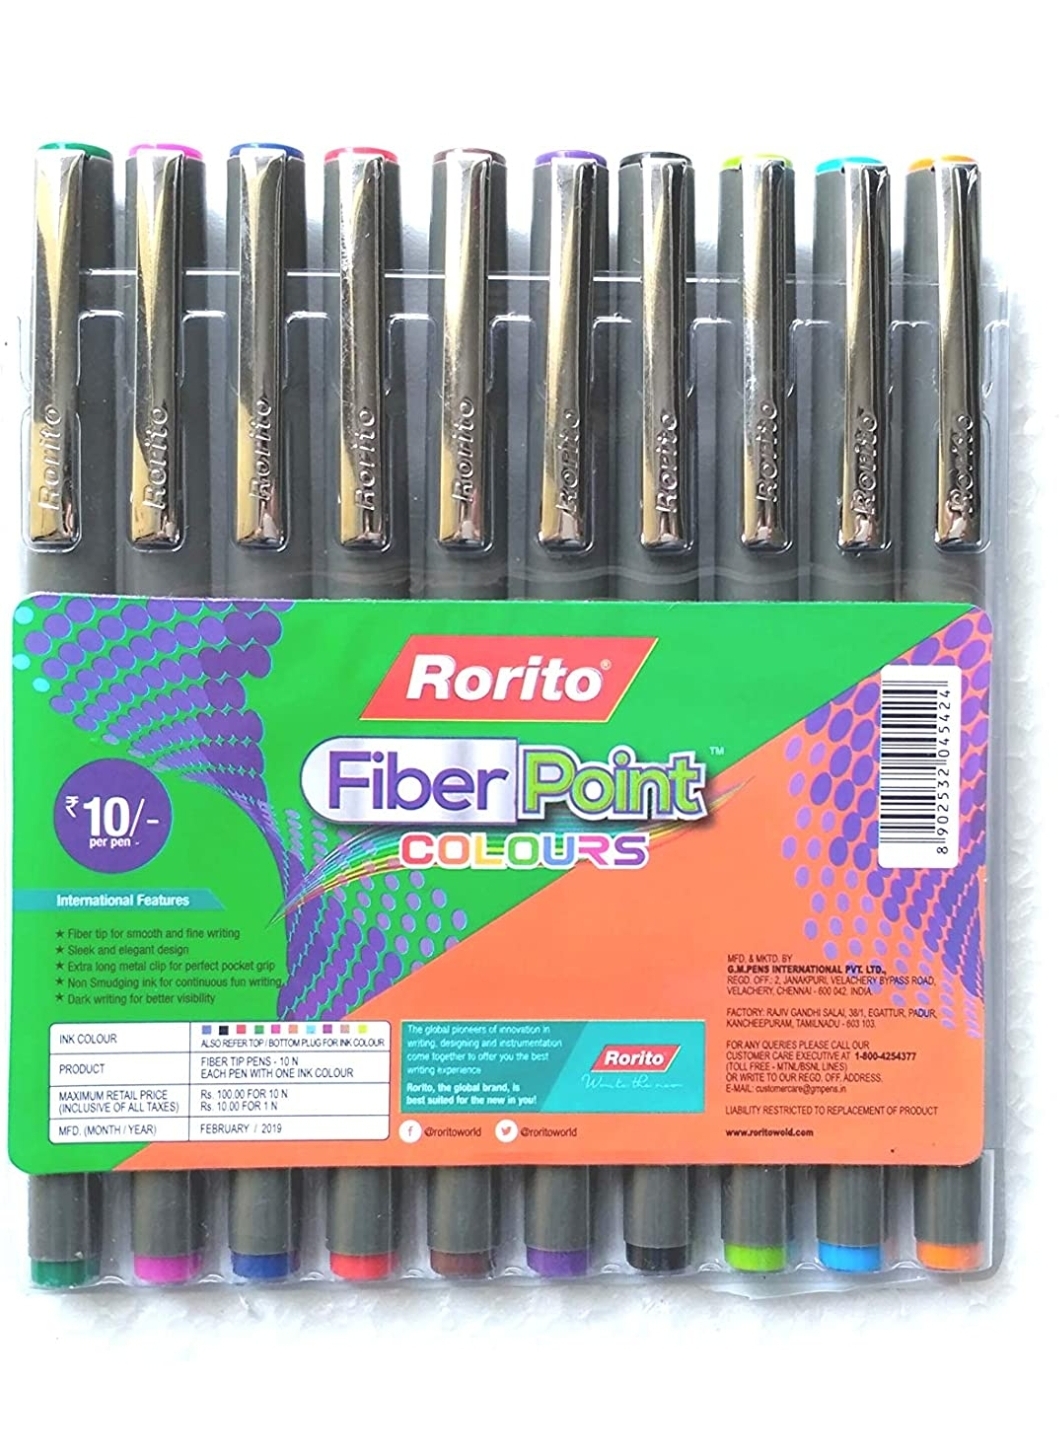 RORITO FIBERPOINT Colours Pen (Pack of 10)